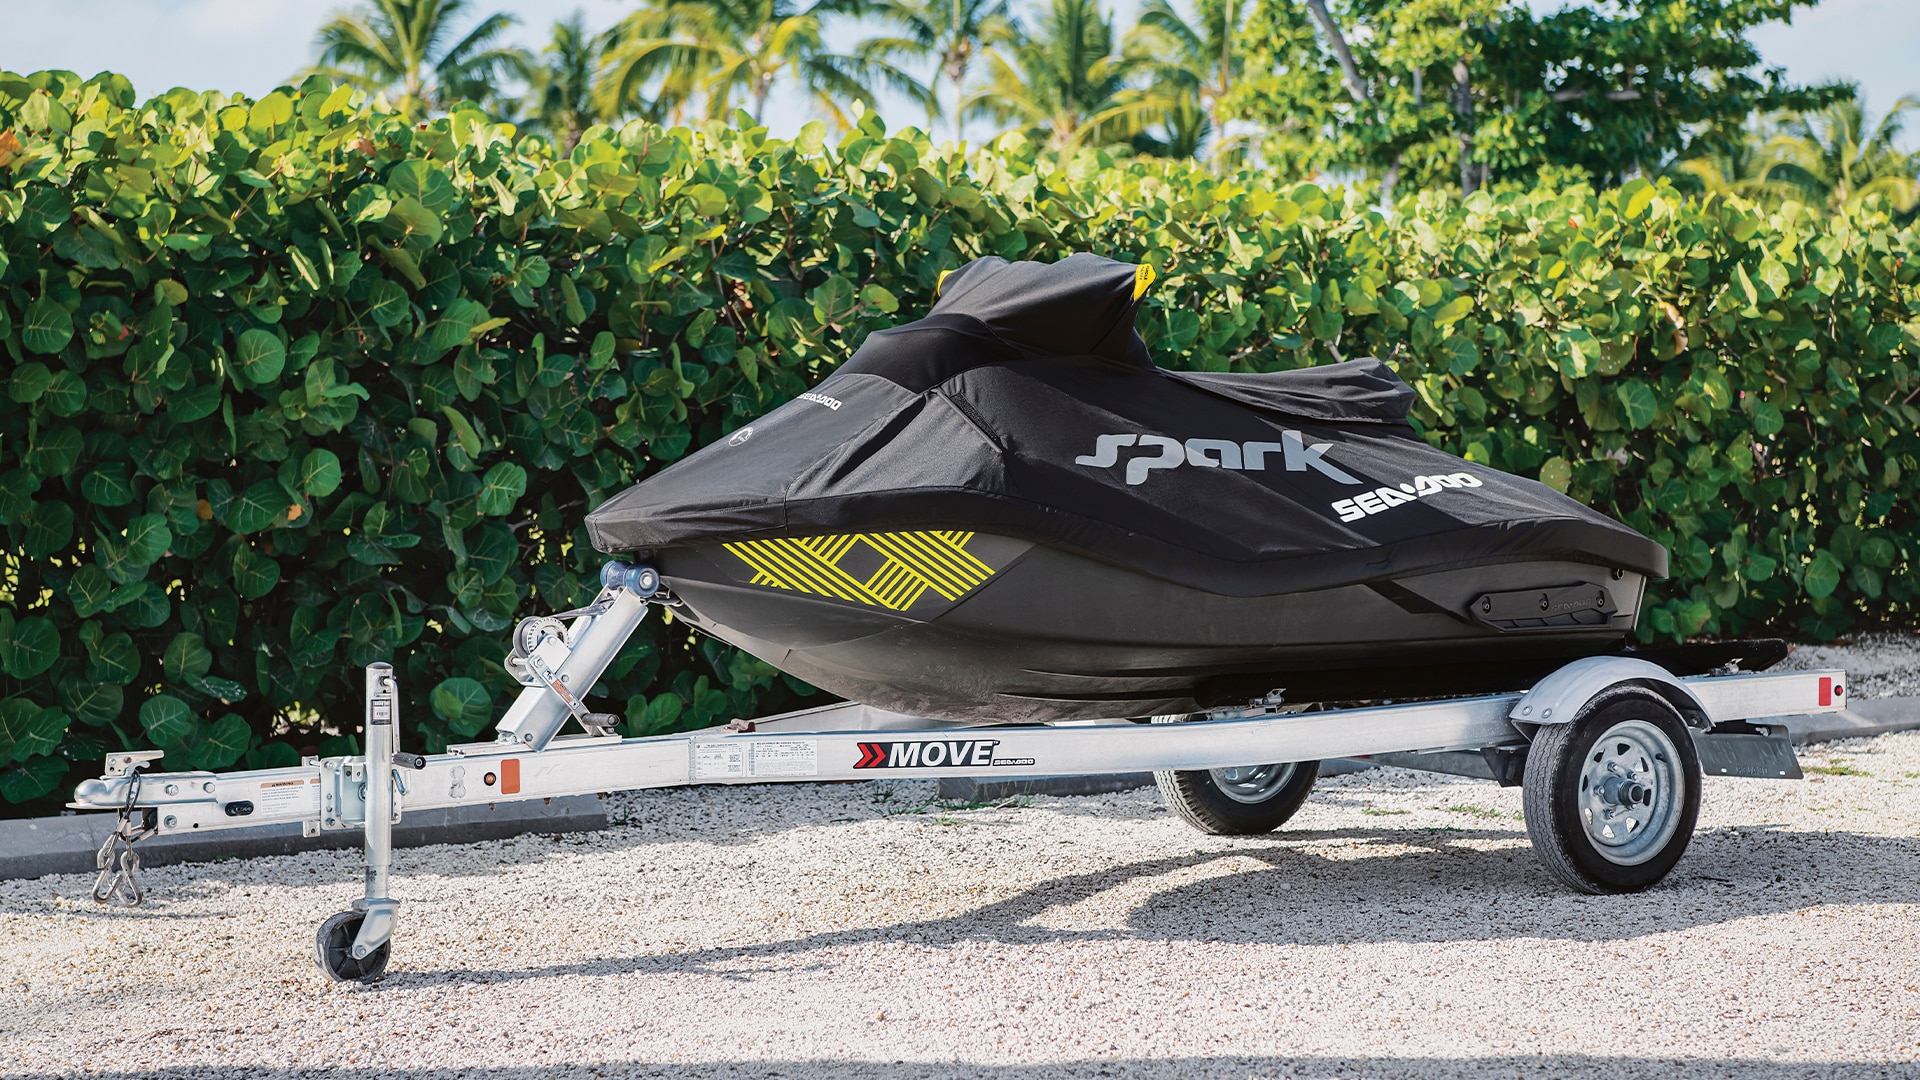 Covered Sea-Doo Spark personal watercraft on a MOVE trailer